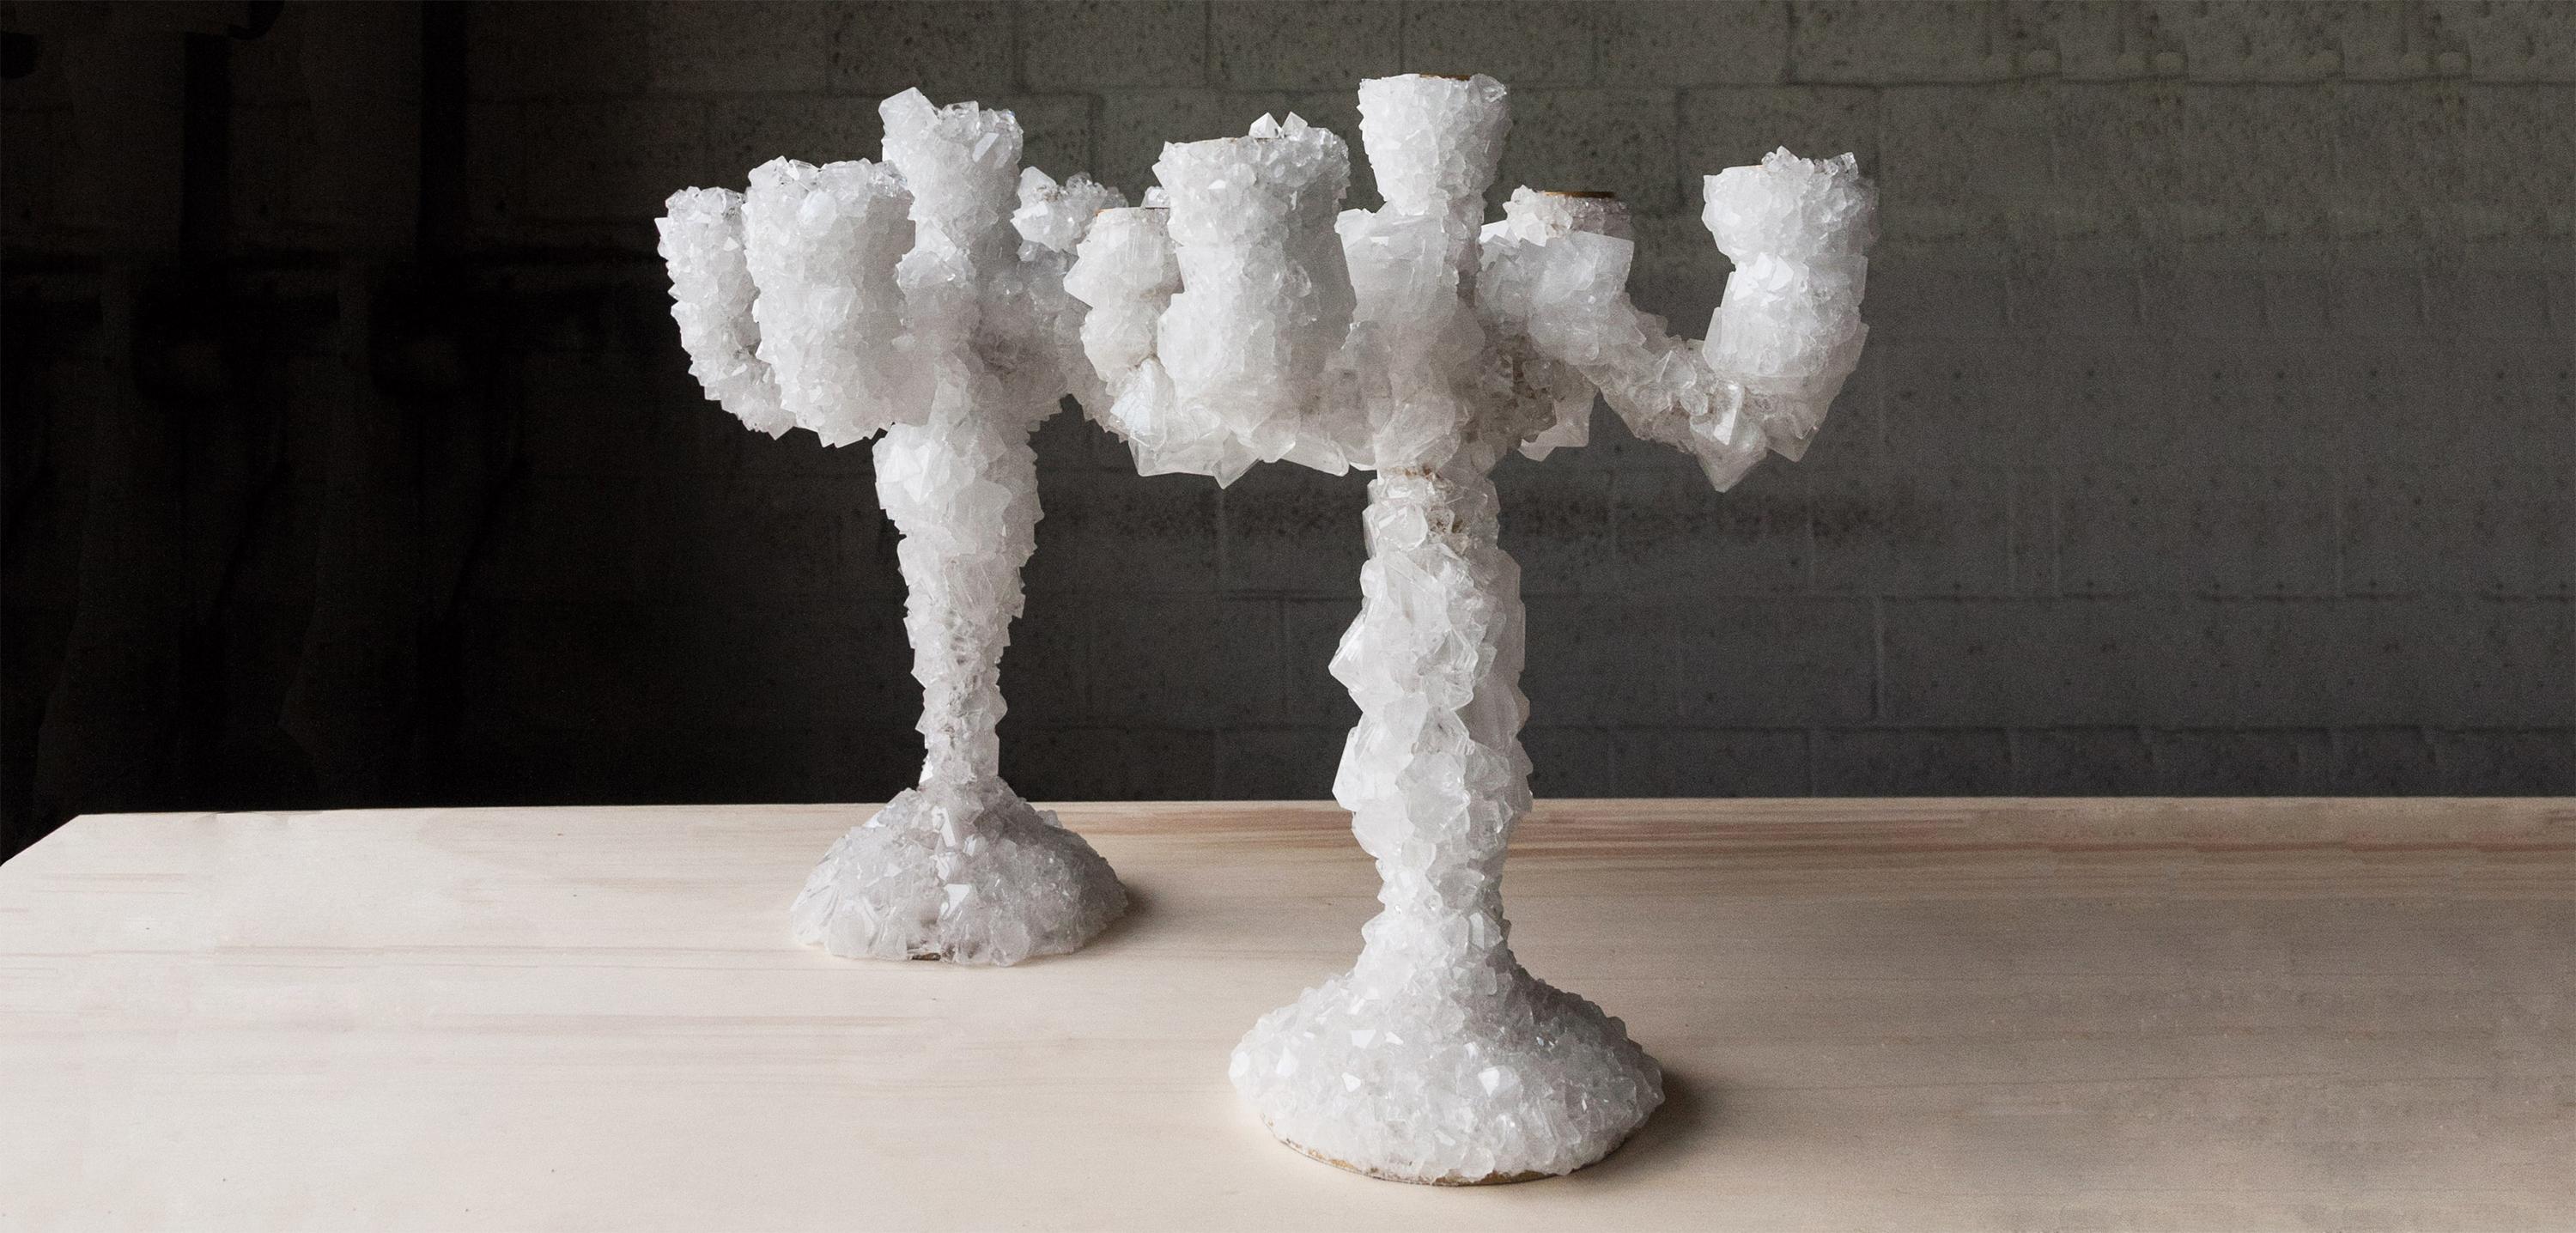 Pair of crystal overgrown candelabras - Mark Sturkenboom
Hand sculpted unique design artwork by Mark Sturkenboom
Dimensions: 53 x 28 x 28 cm
Material: aluminium candleholder, natural grown crystal
Detail: crystal can also be in grey /